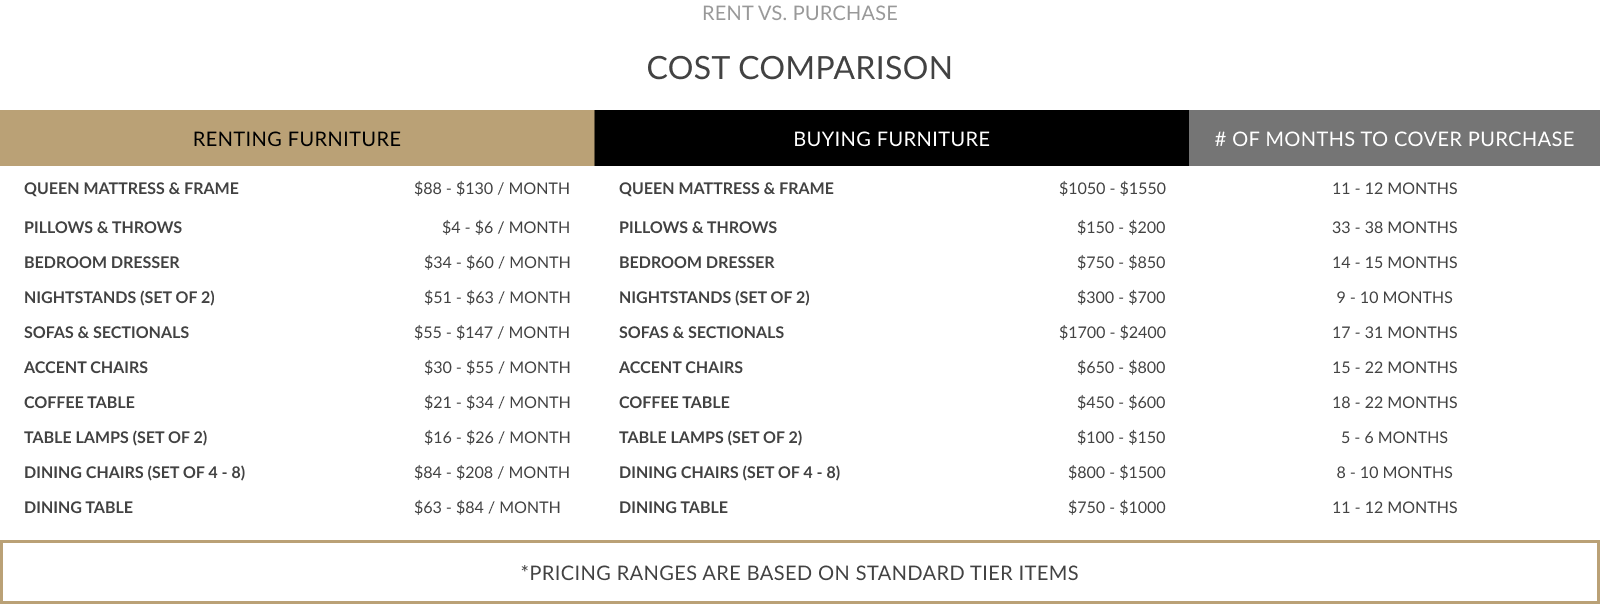 rent vs purchasing furniture table